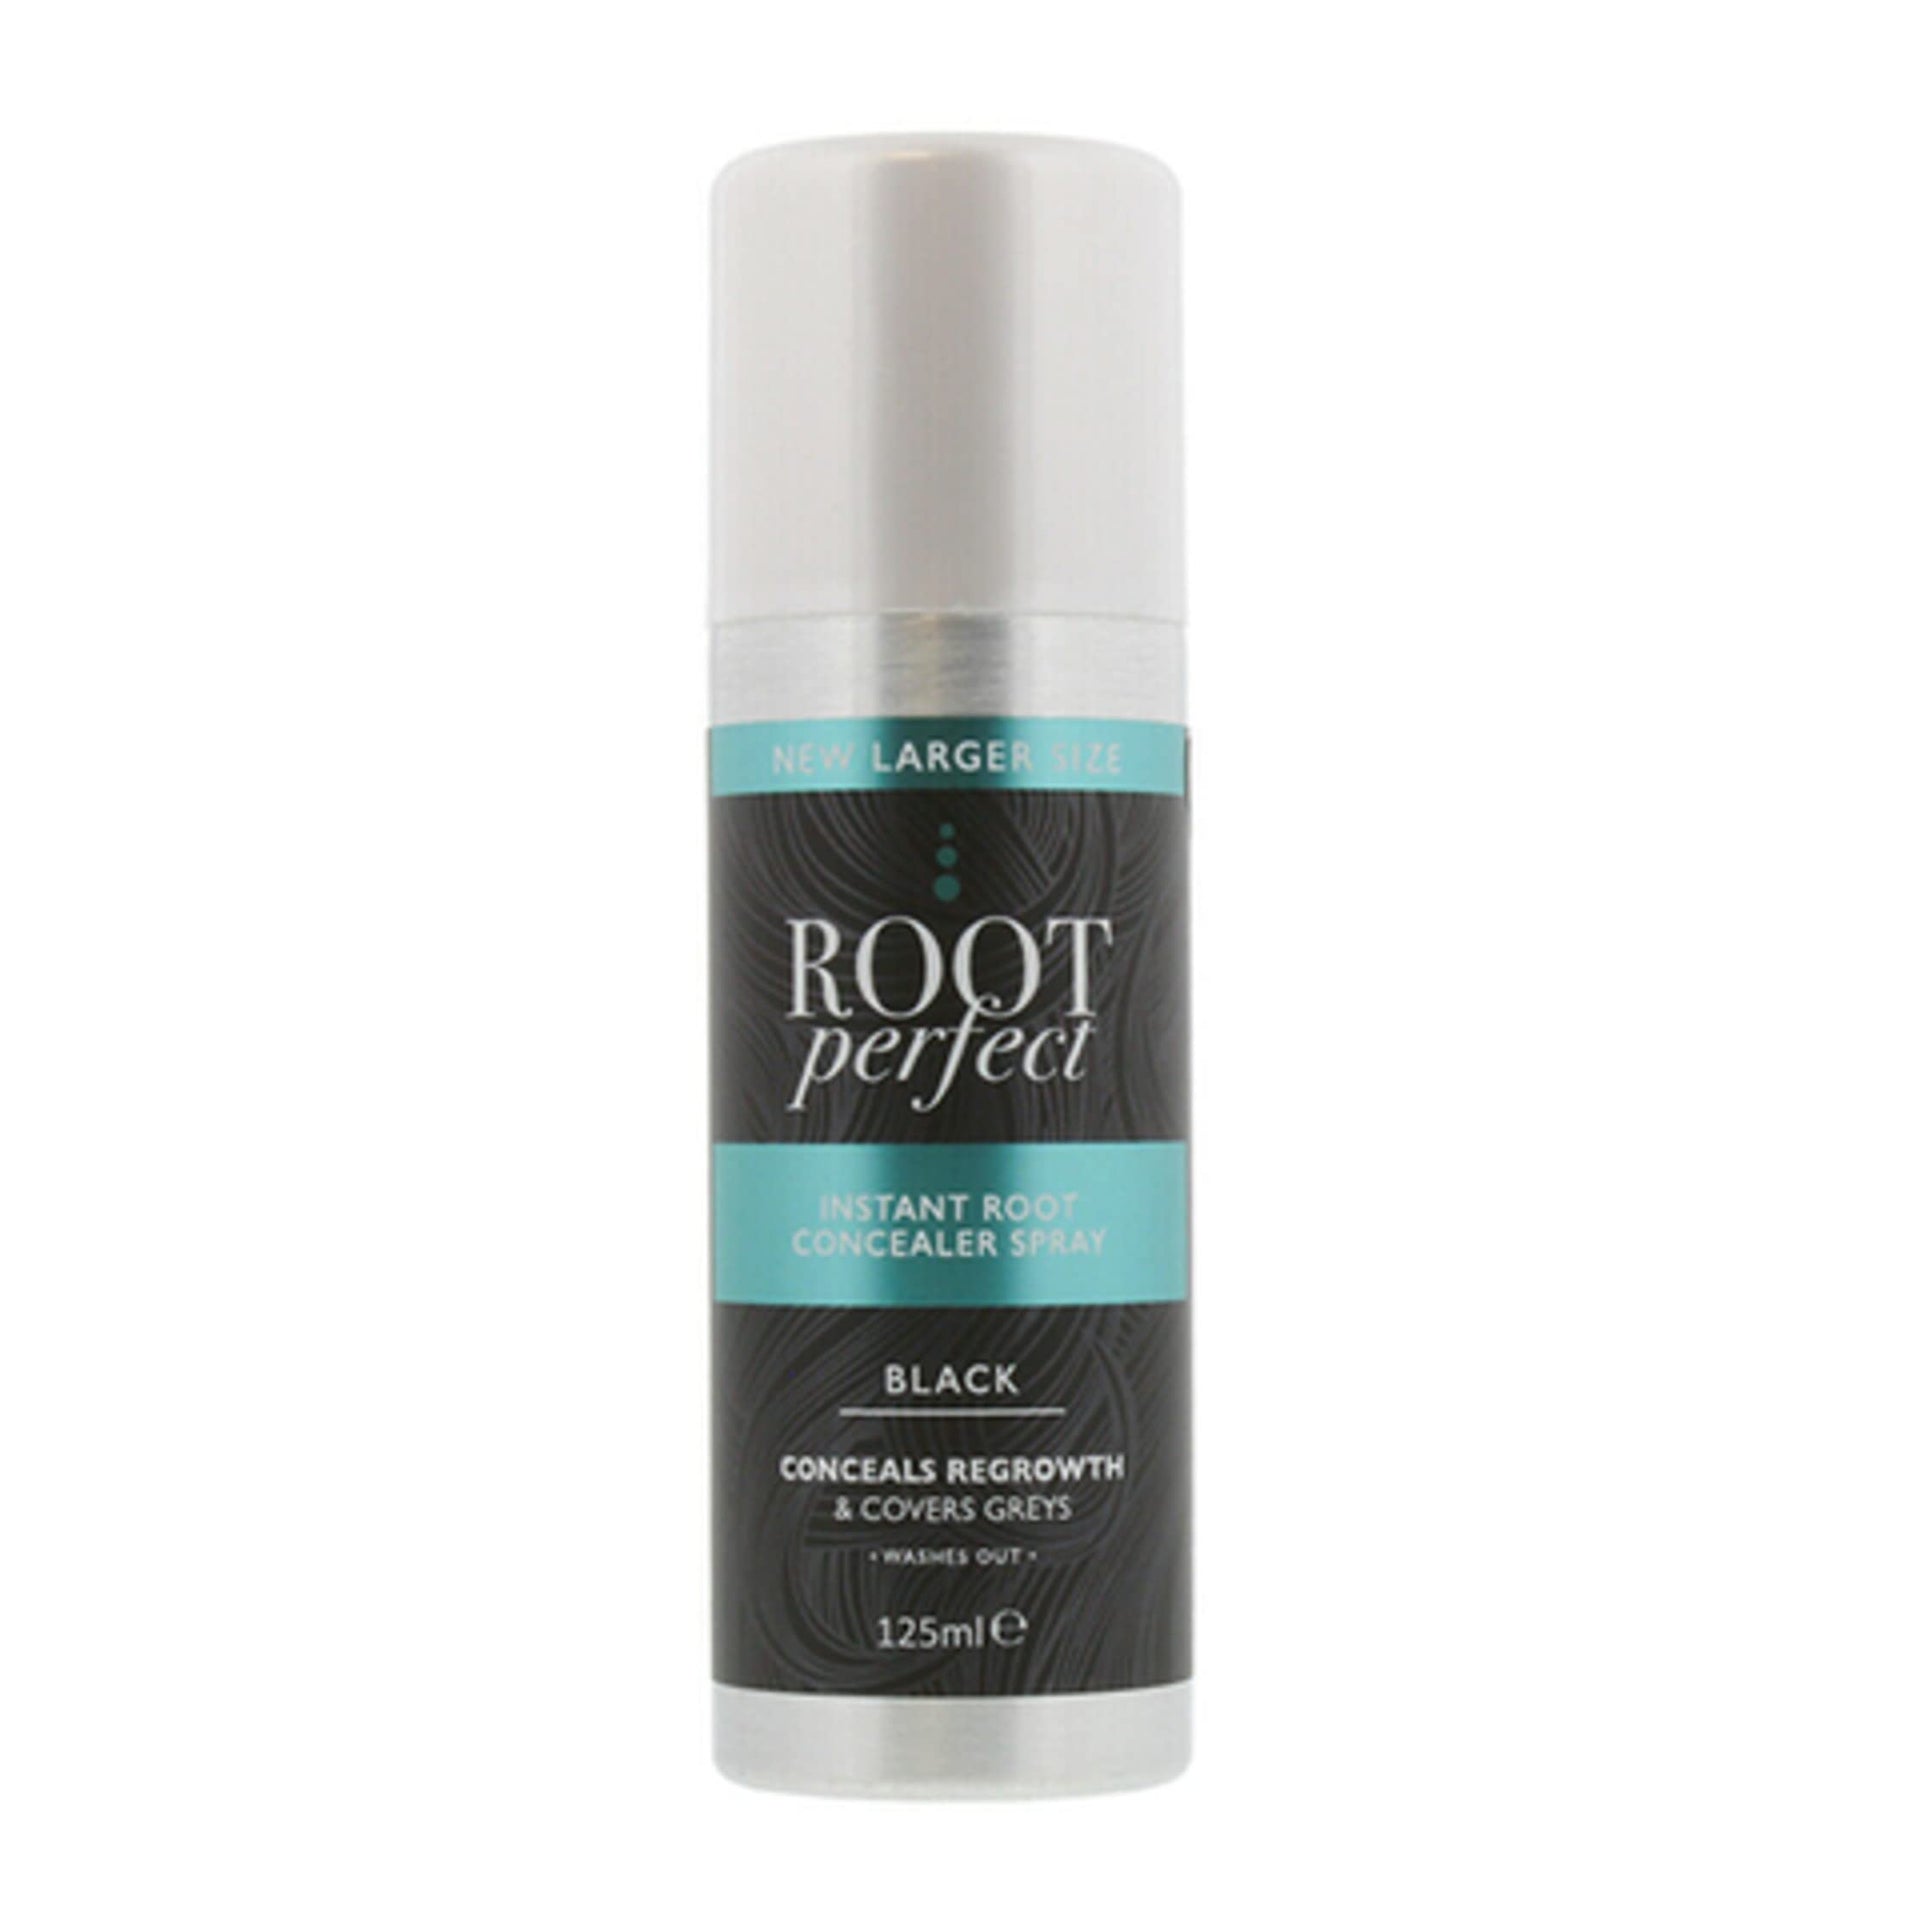 Root Perfect Instant Root Concealer Spray Black 75ml & 125ml